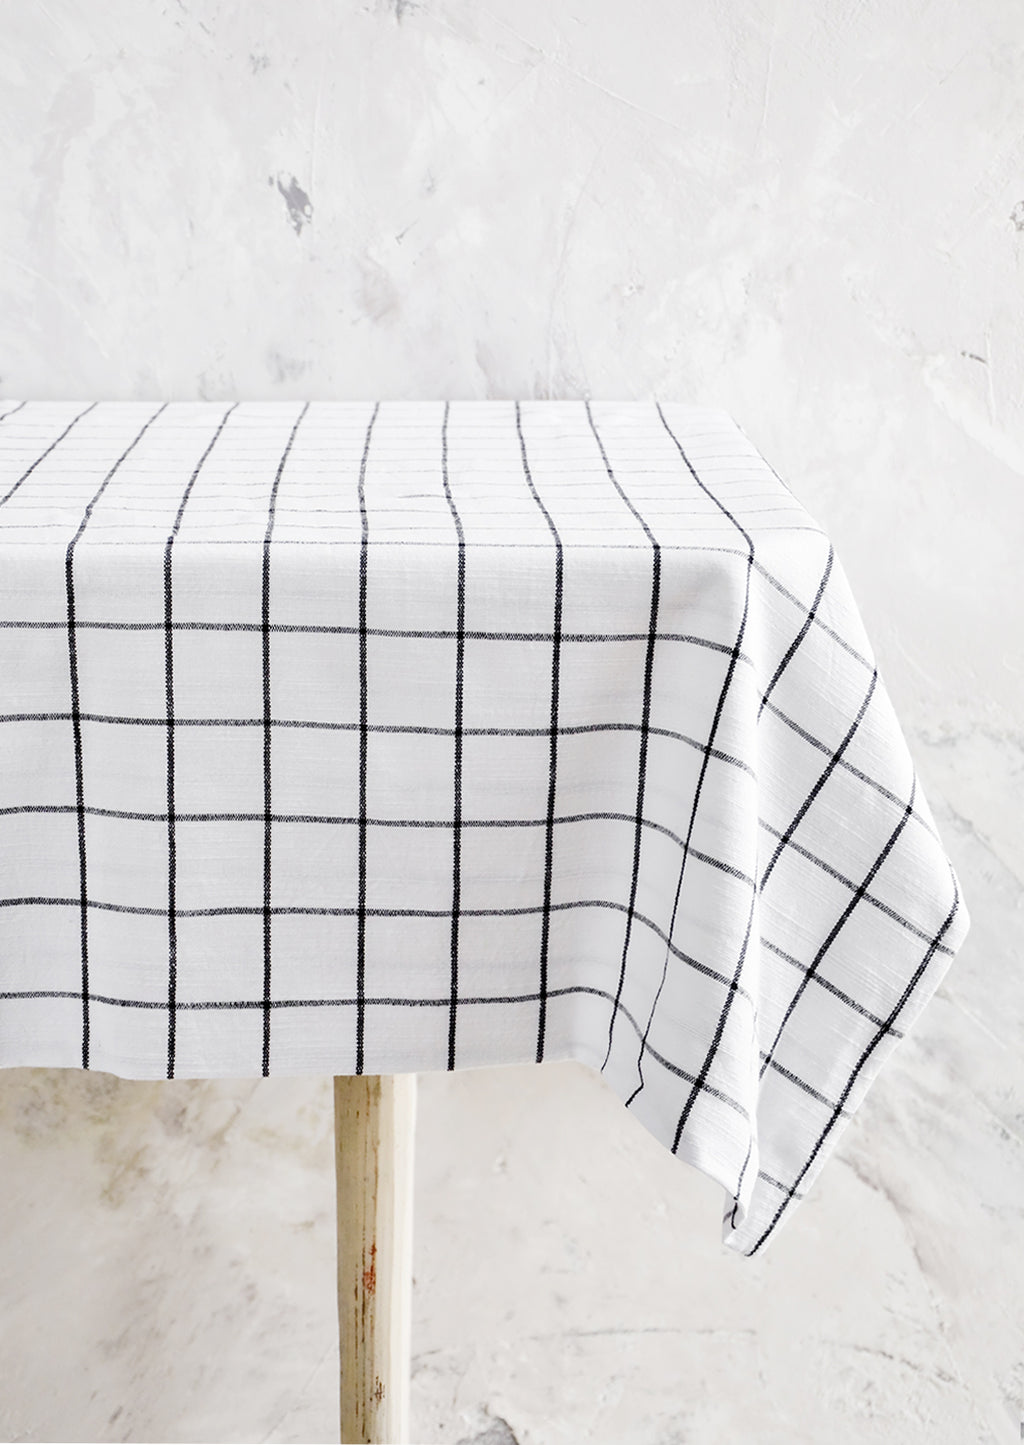 1: Black and white grid patterned tablecloth displayed over table